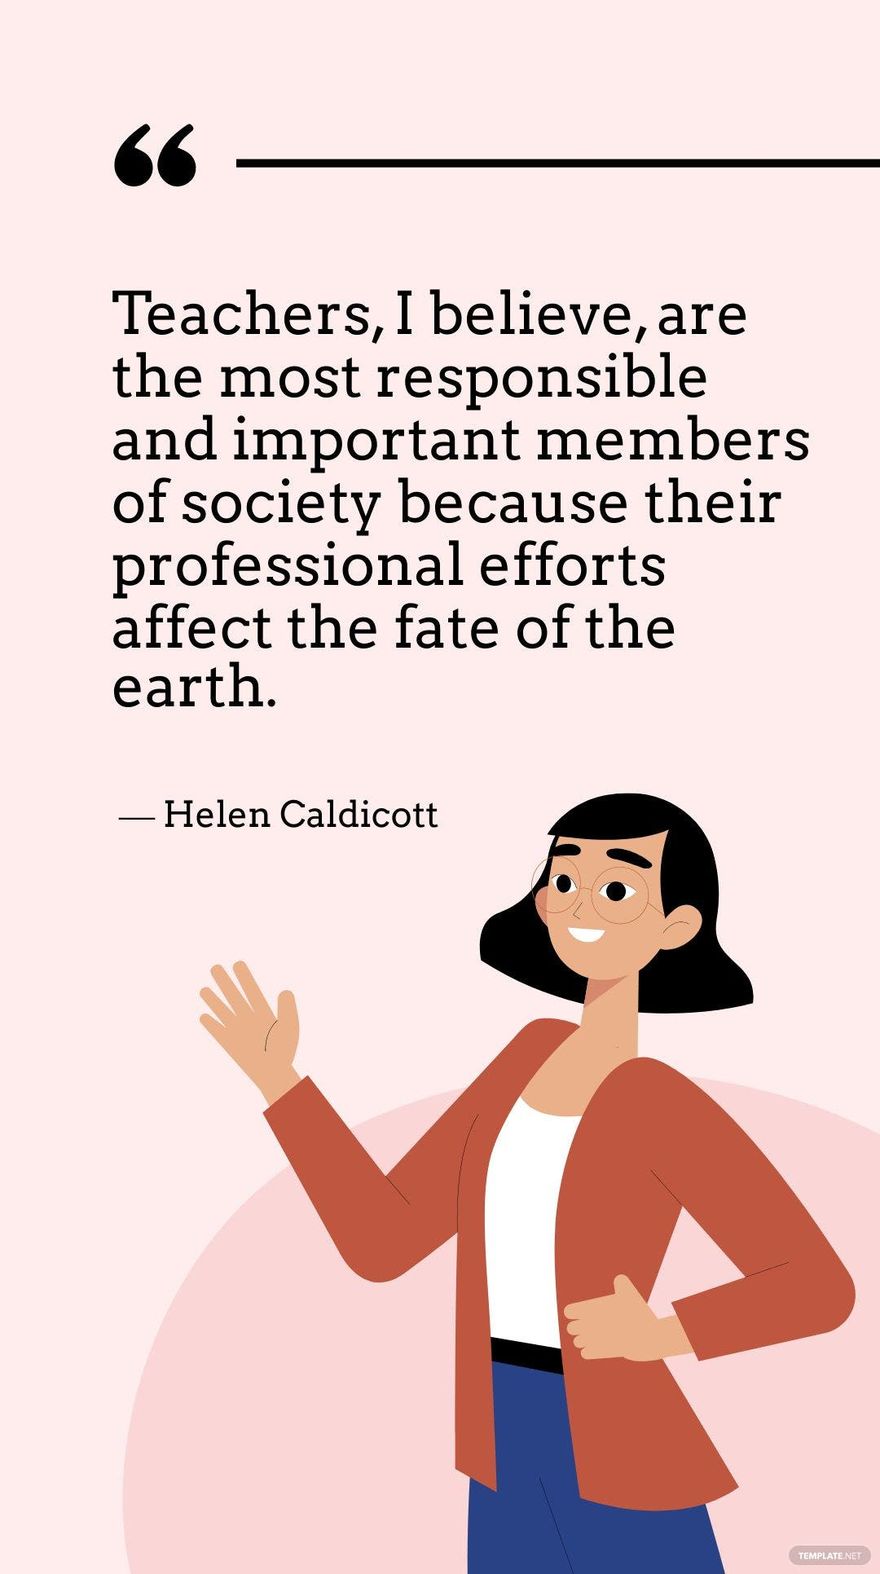 Helen Caldicott - Teachers, I believe, are the most responsible and important members of society because their professional efforts affect the fate of the earth.